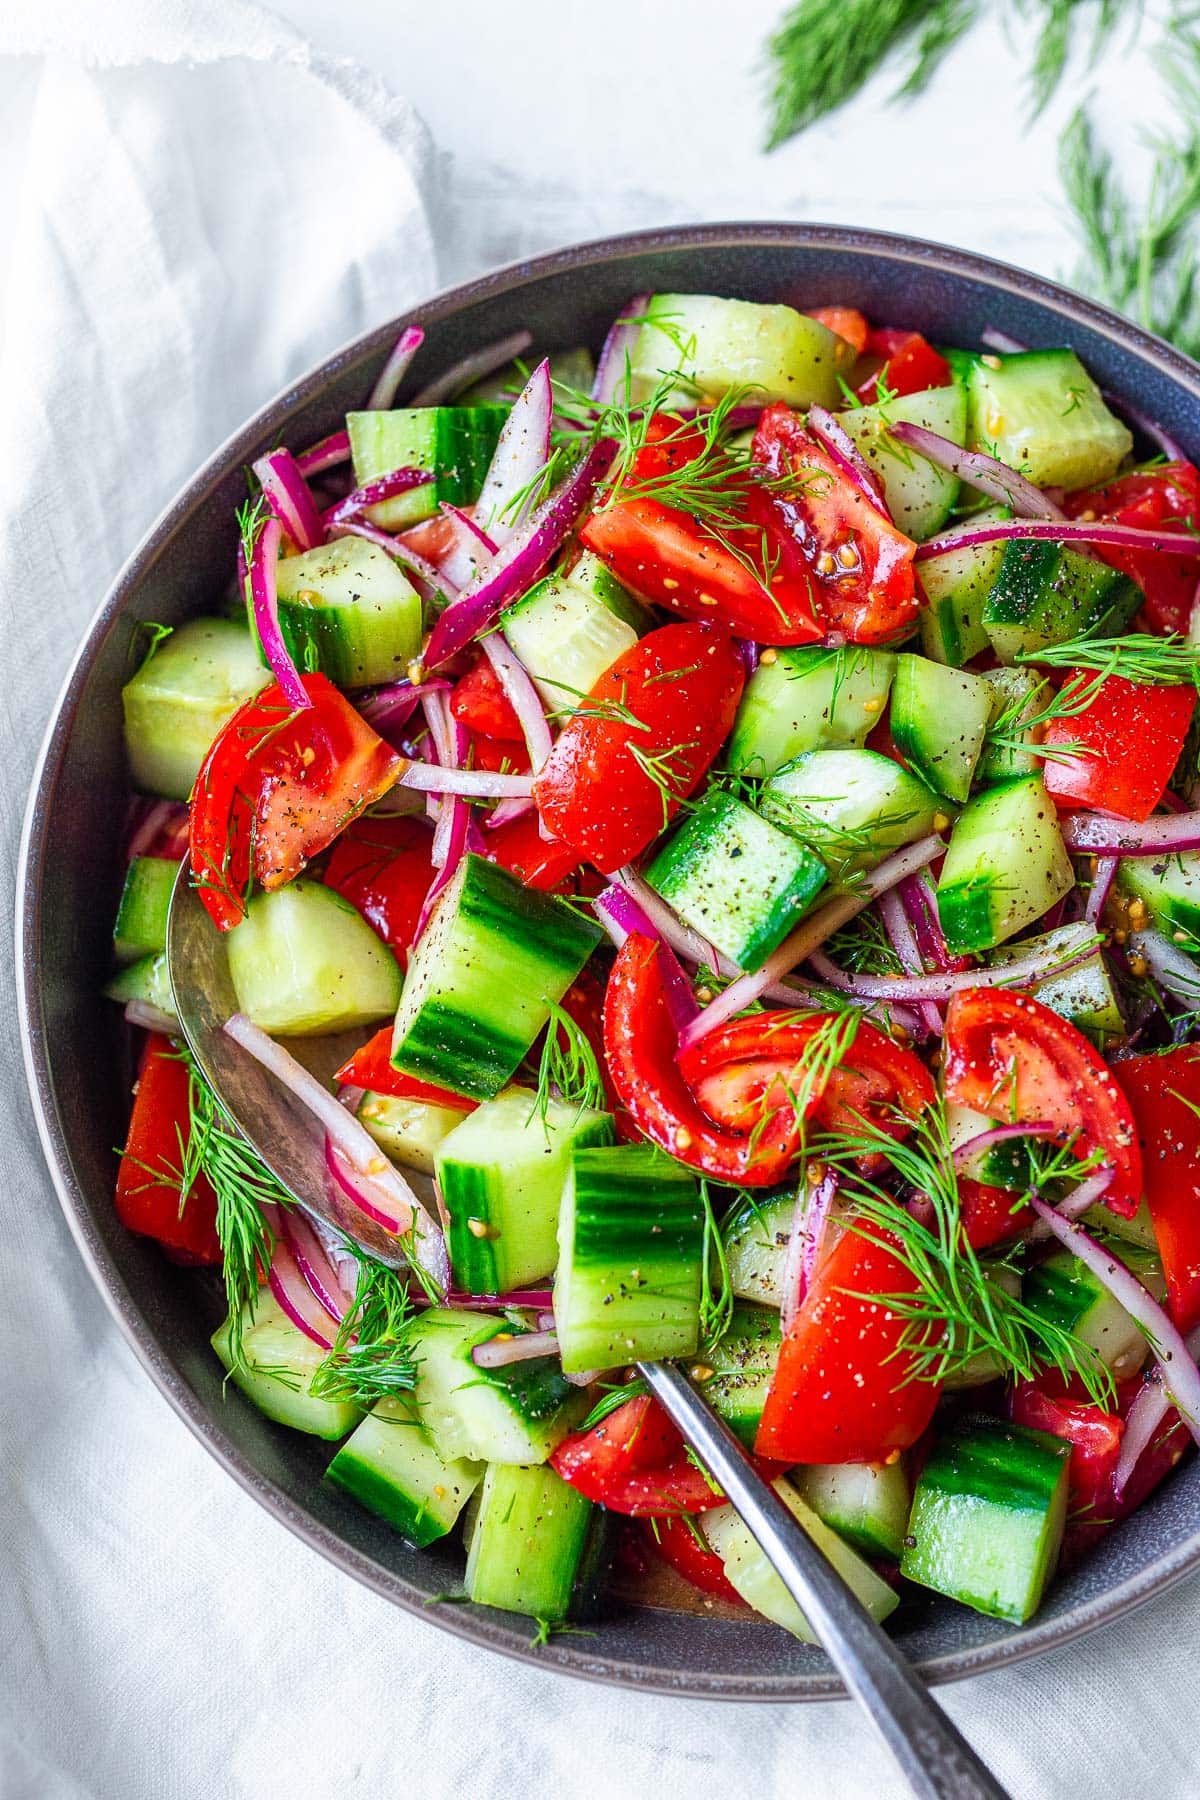 Looking for a light and healthy summer salad? This quick & easy Cucumber Tomato Salad is fresh and light, made with vine-ripe tomatoes and juicy cucumbers, slivers of red onion, and fresh dill, tossed in a red-wine vinaigrette.